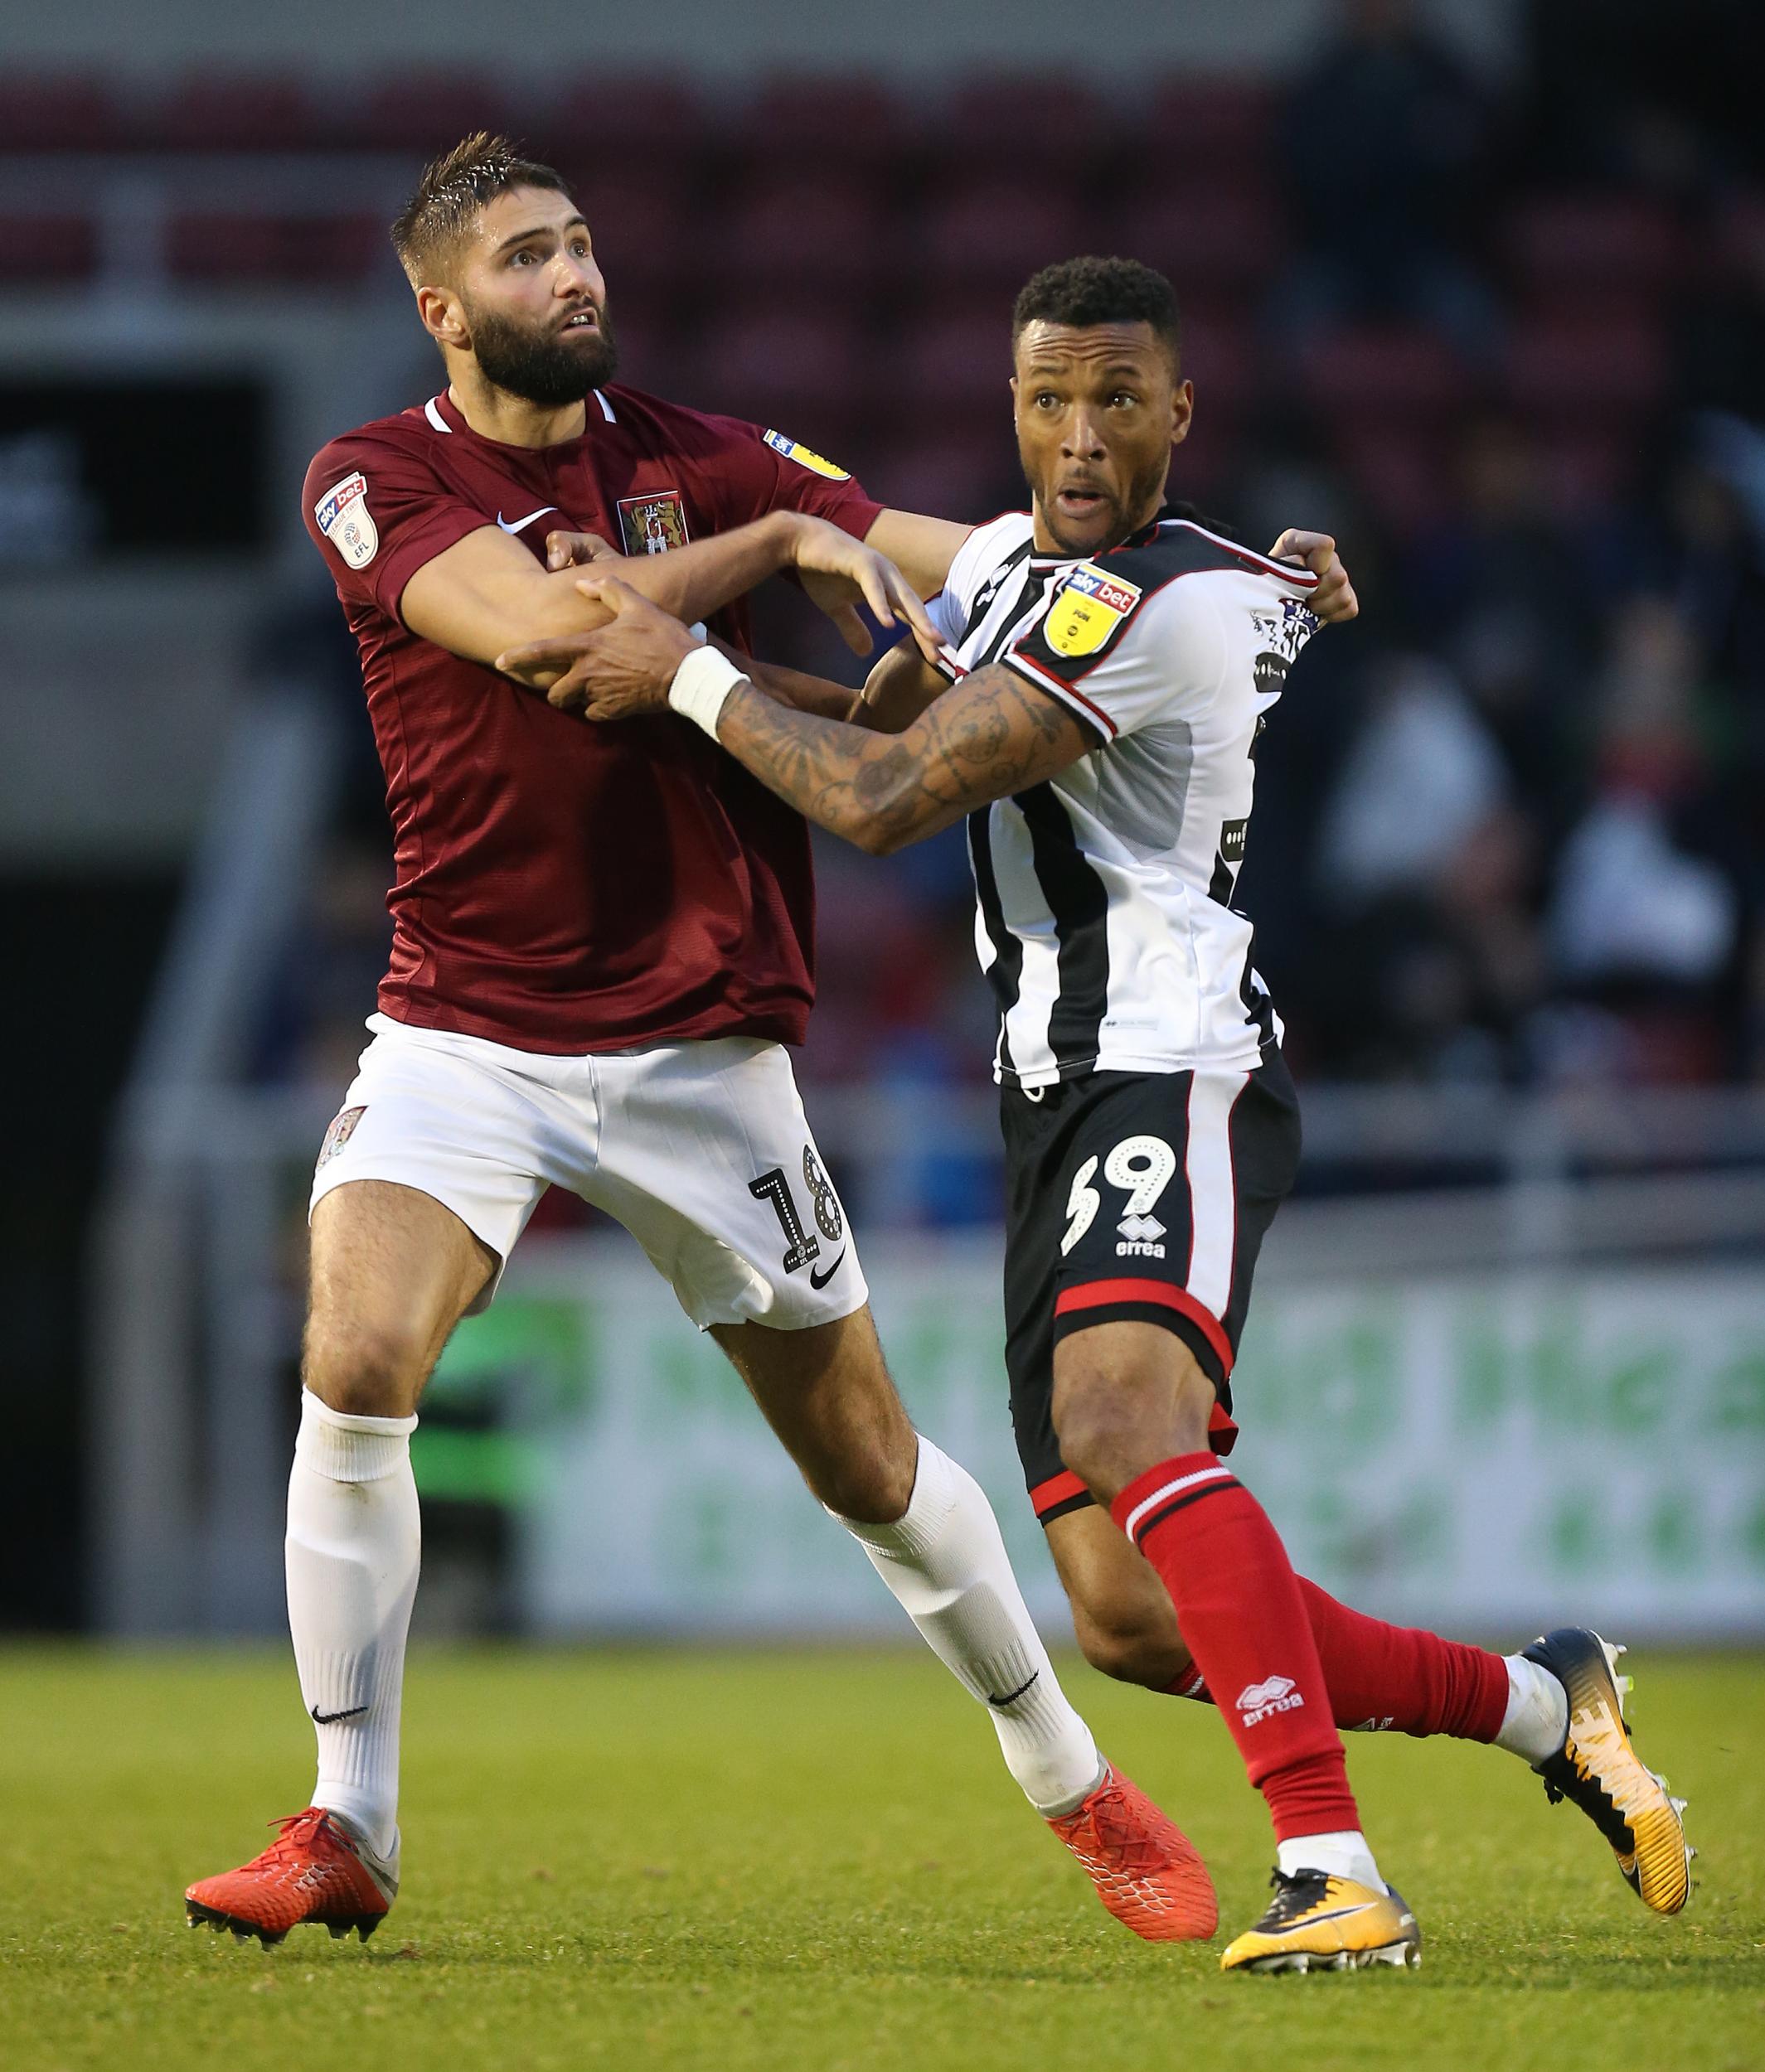 Jolley's unusual journey has led him to the rough and tumble of League Two with Grimsby Town